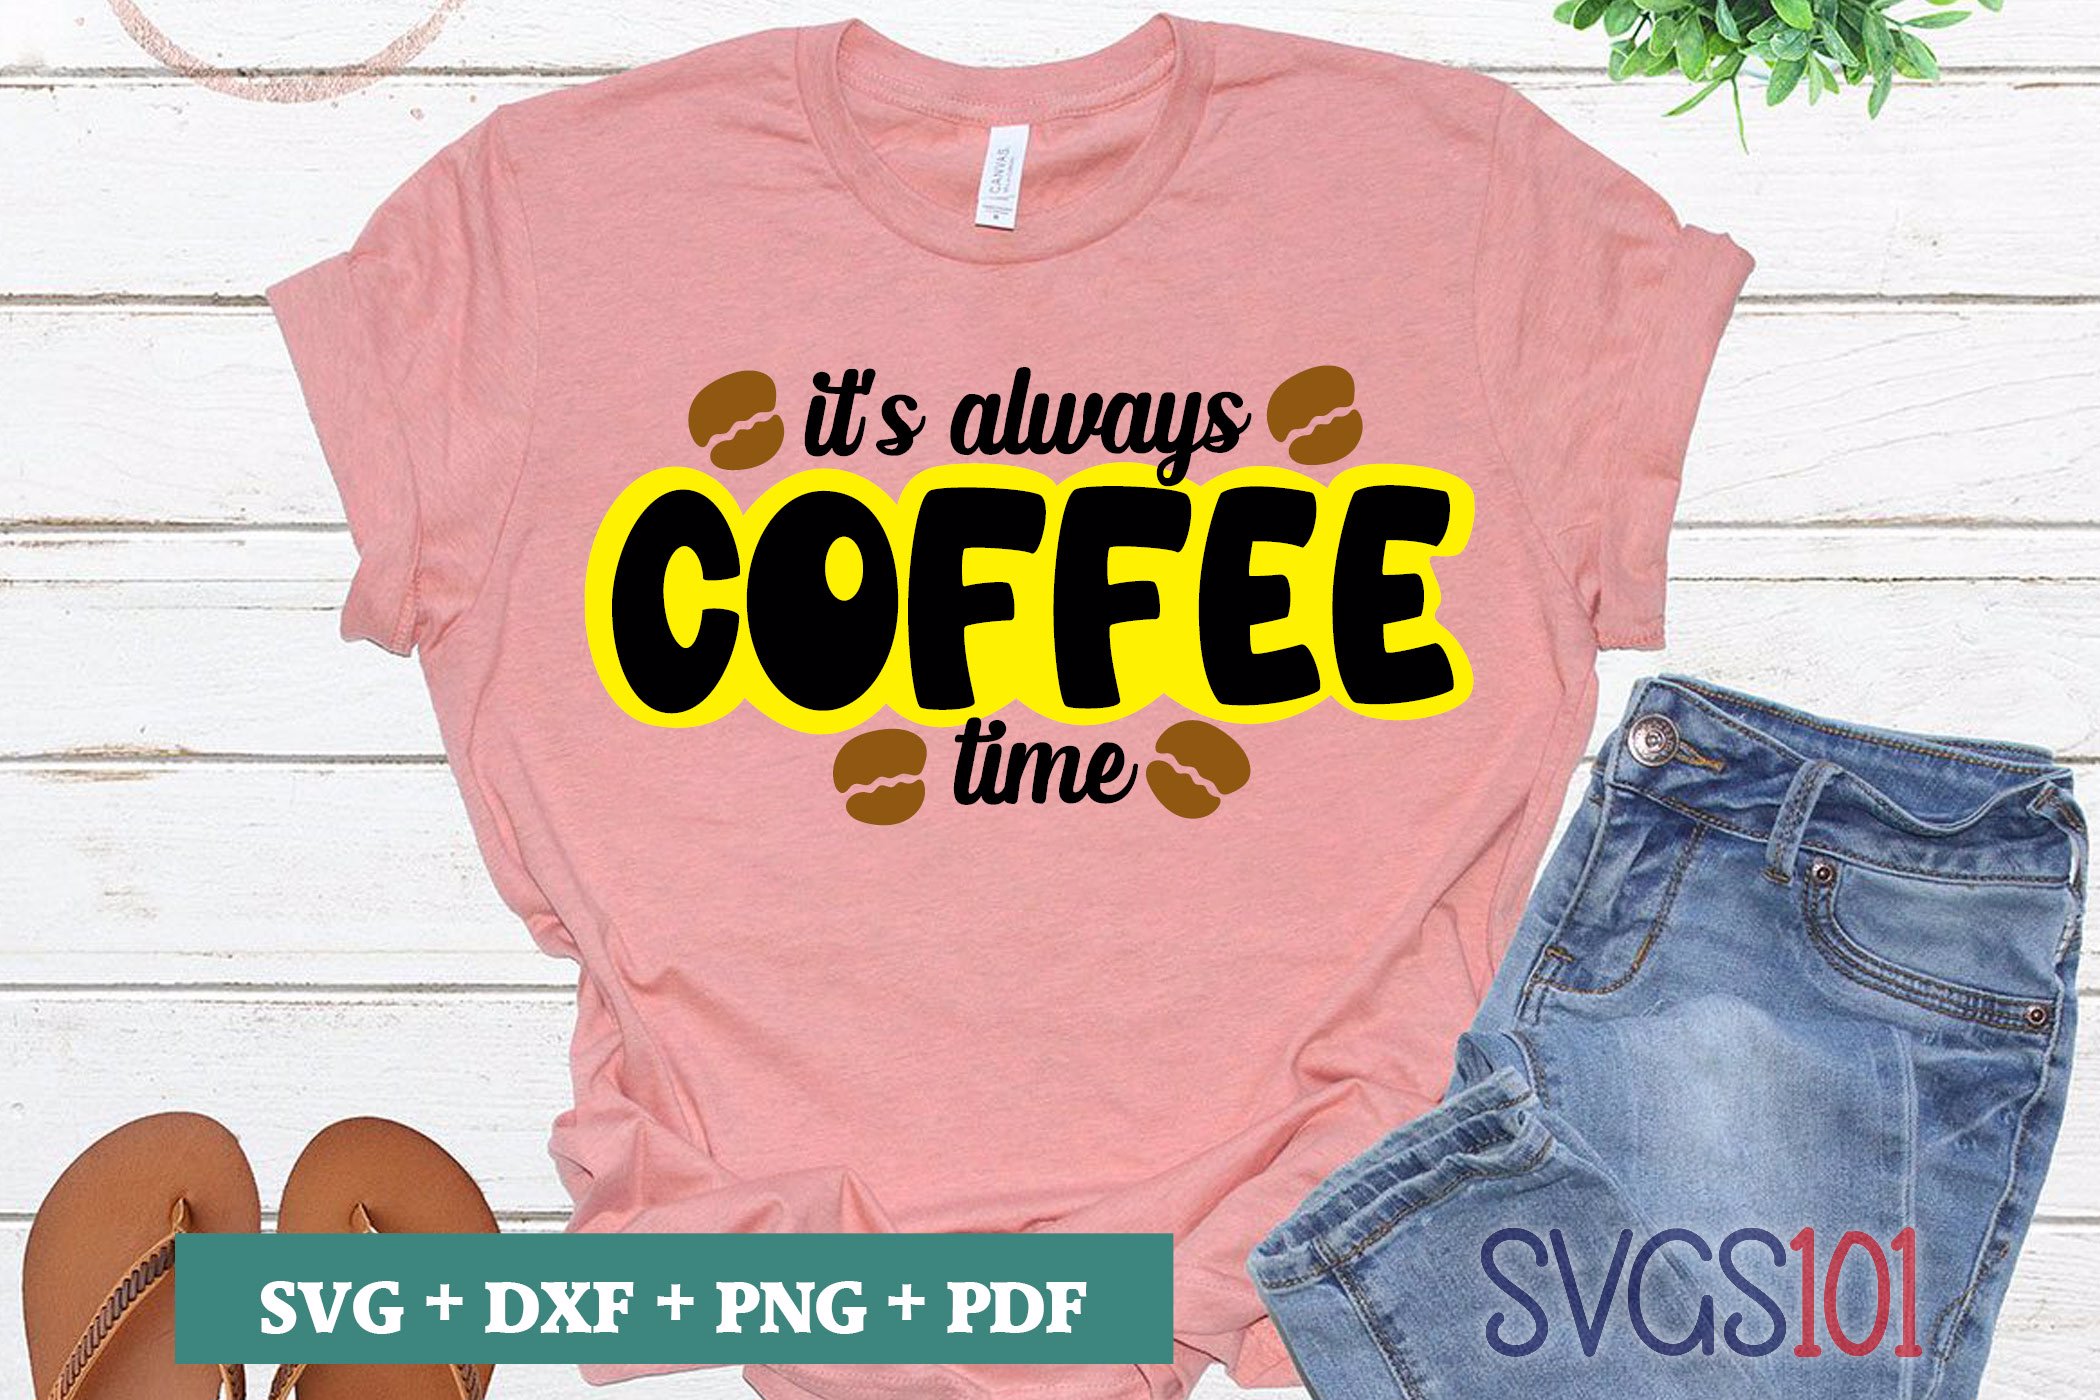 Download It's Always Coffee Time SVG Cuttable file - DXF, EPS, PNG ...